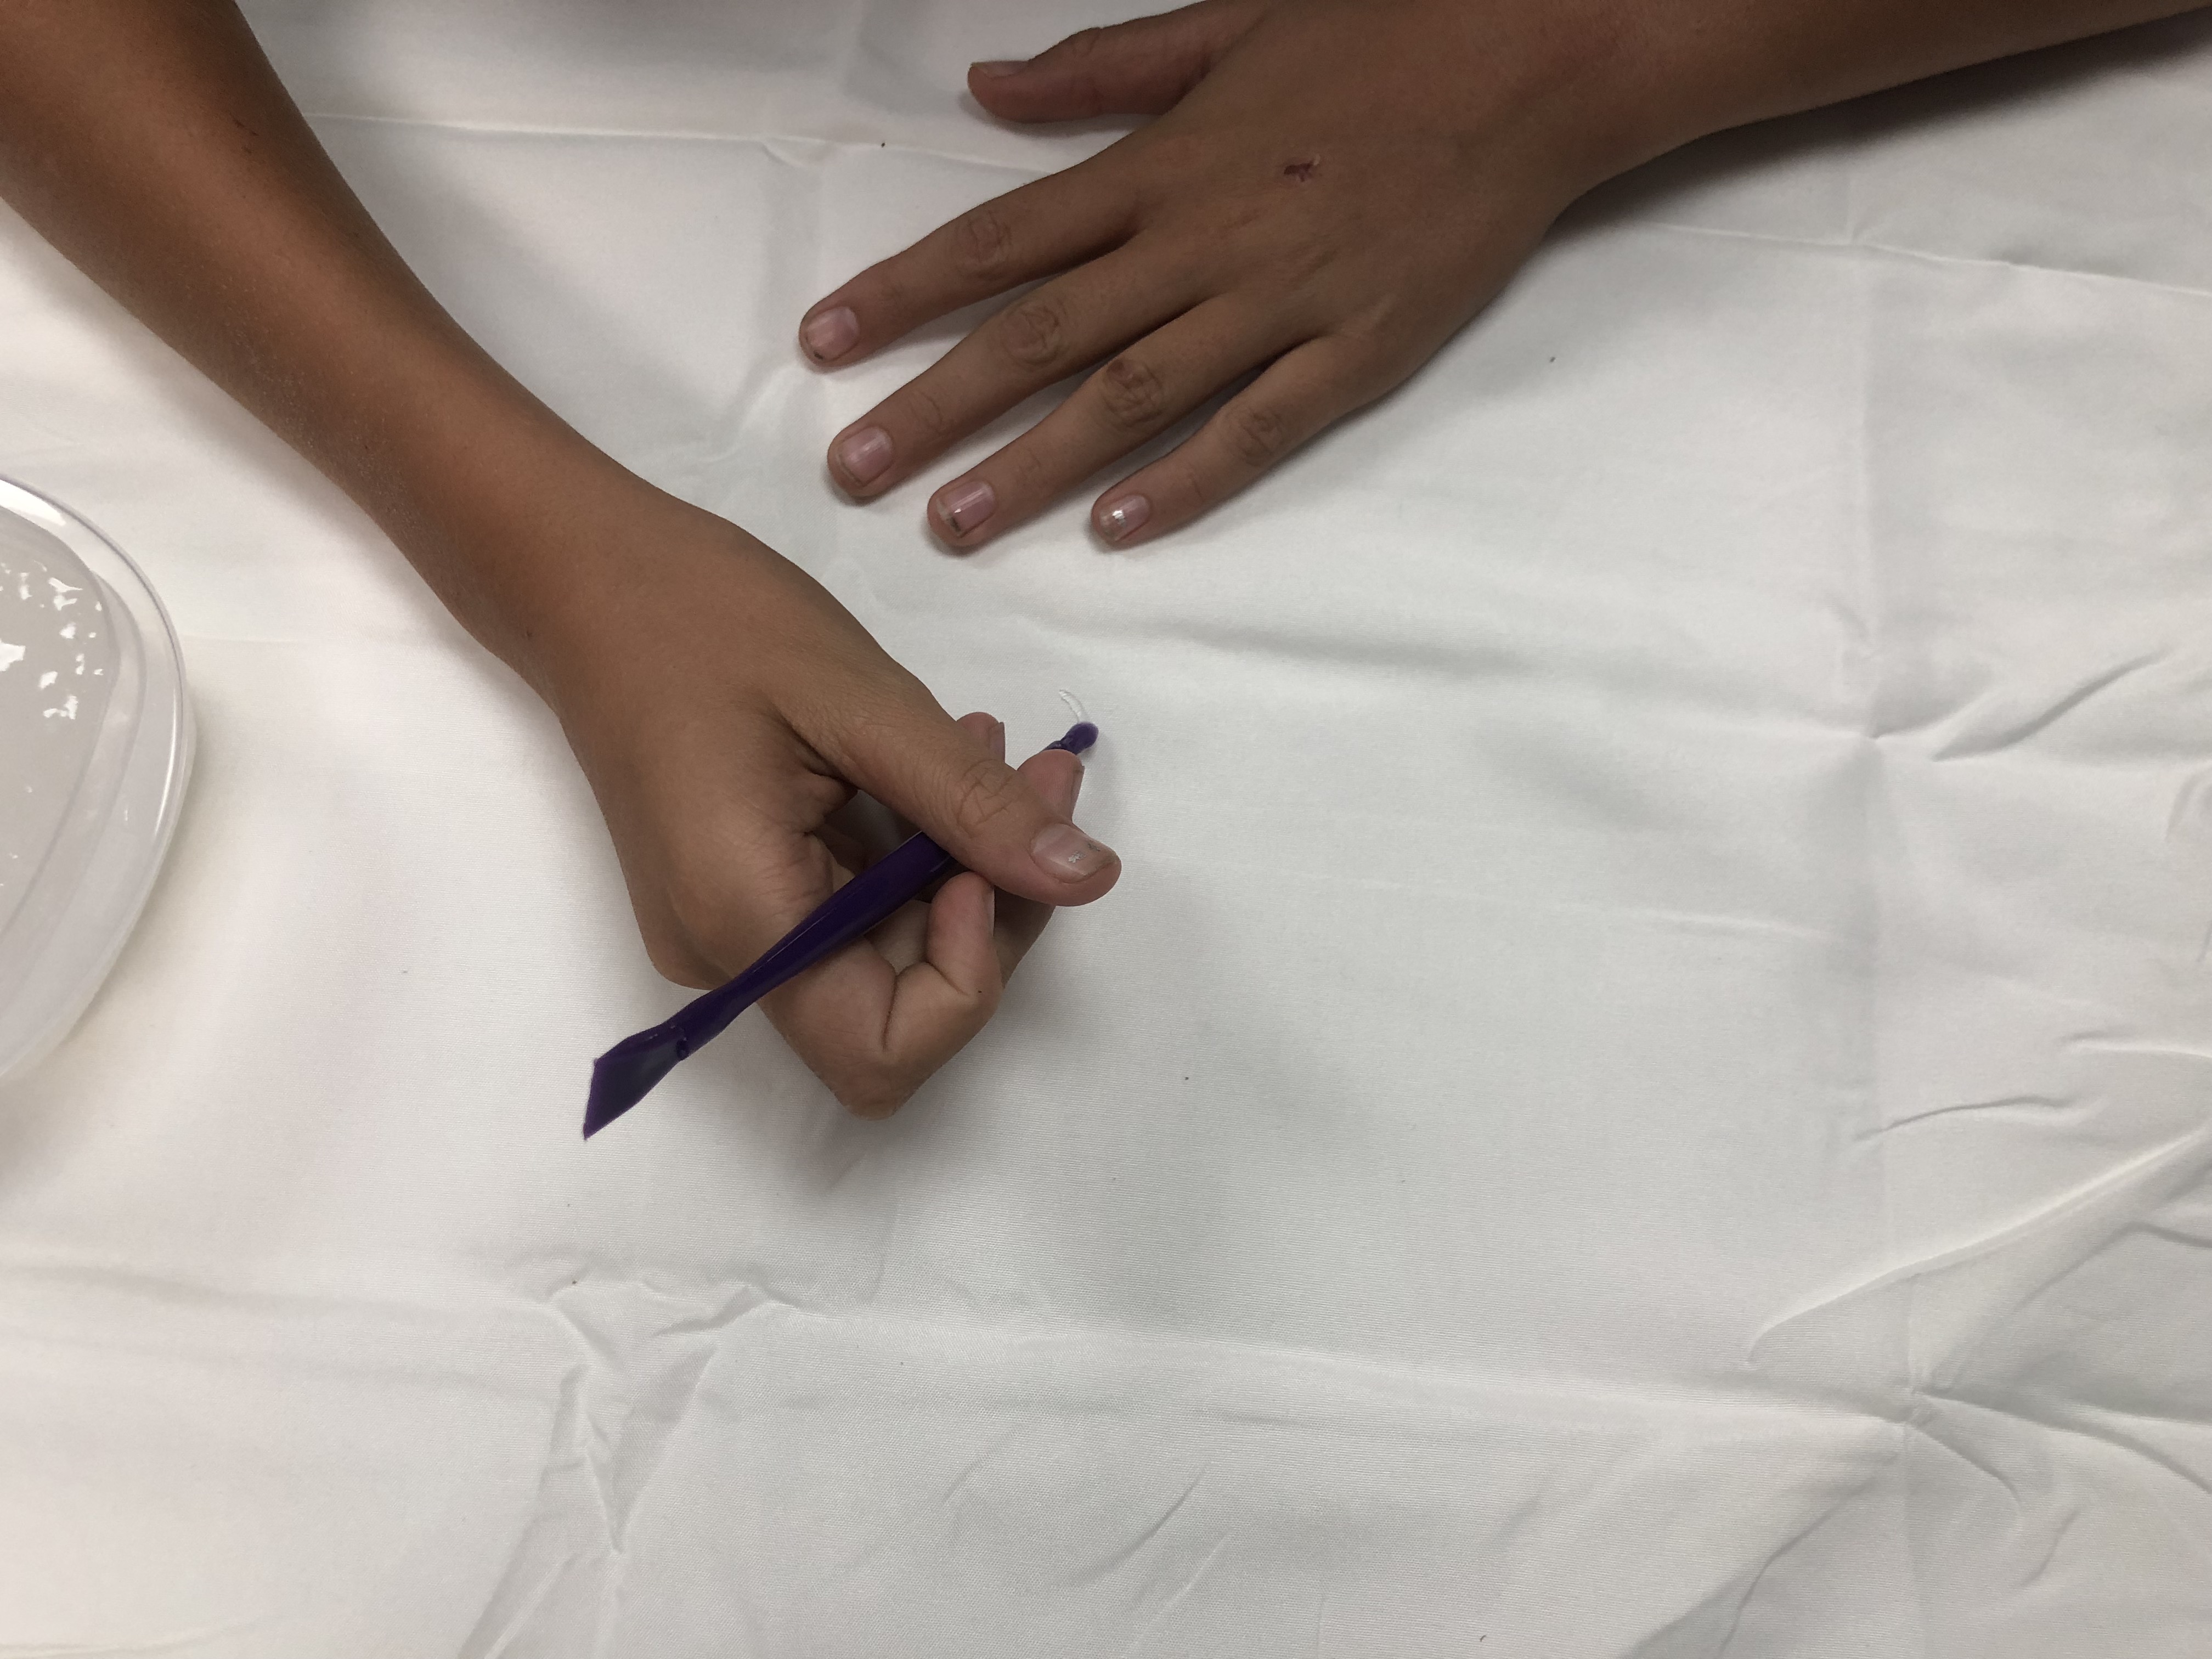 Hands using cassava flour starch paste to make patterns on fabric